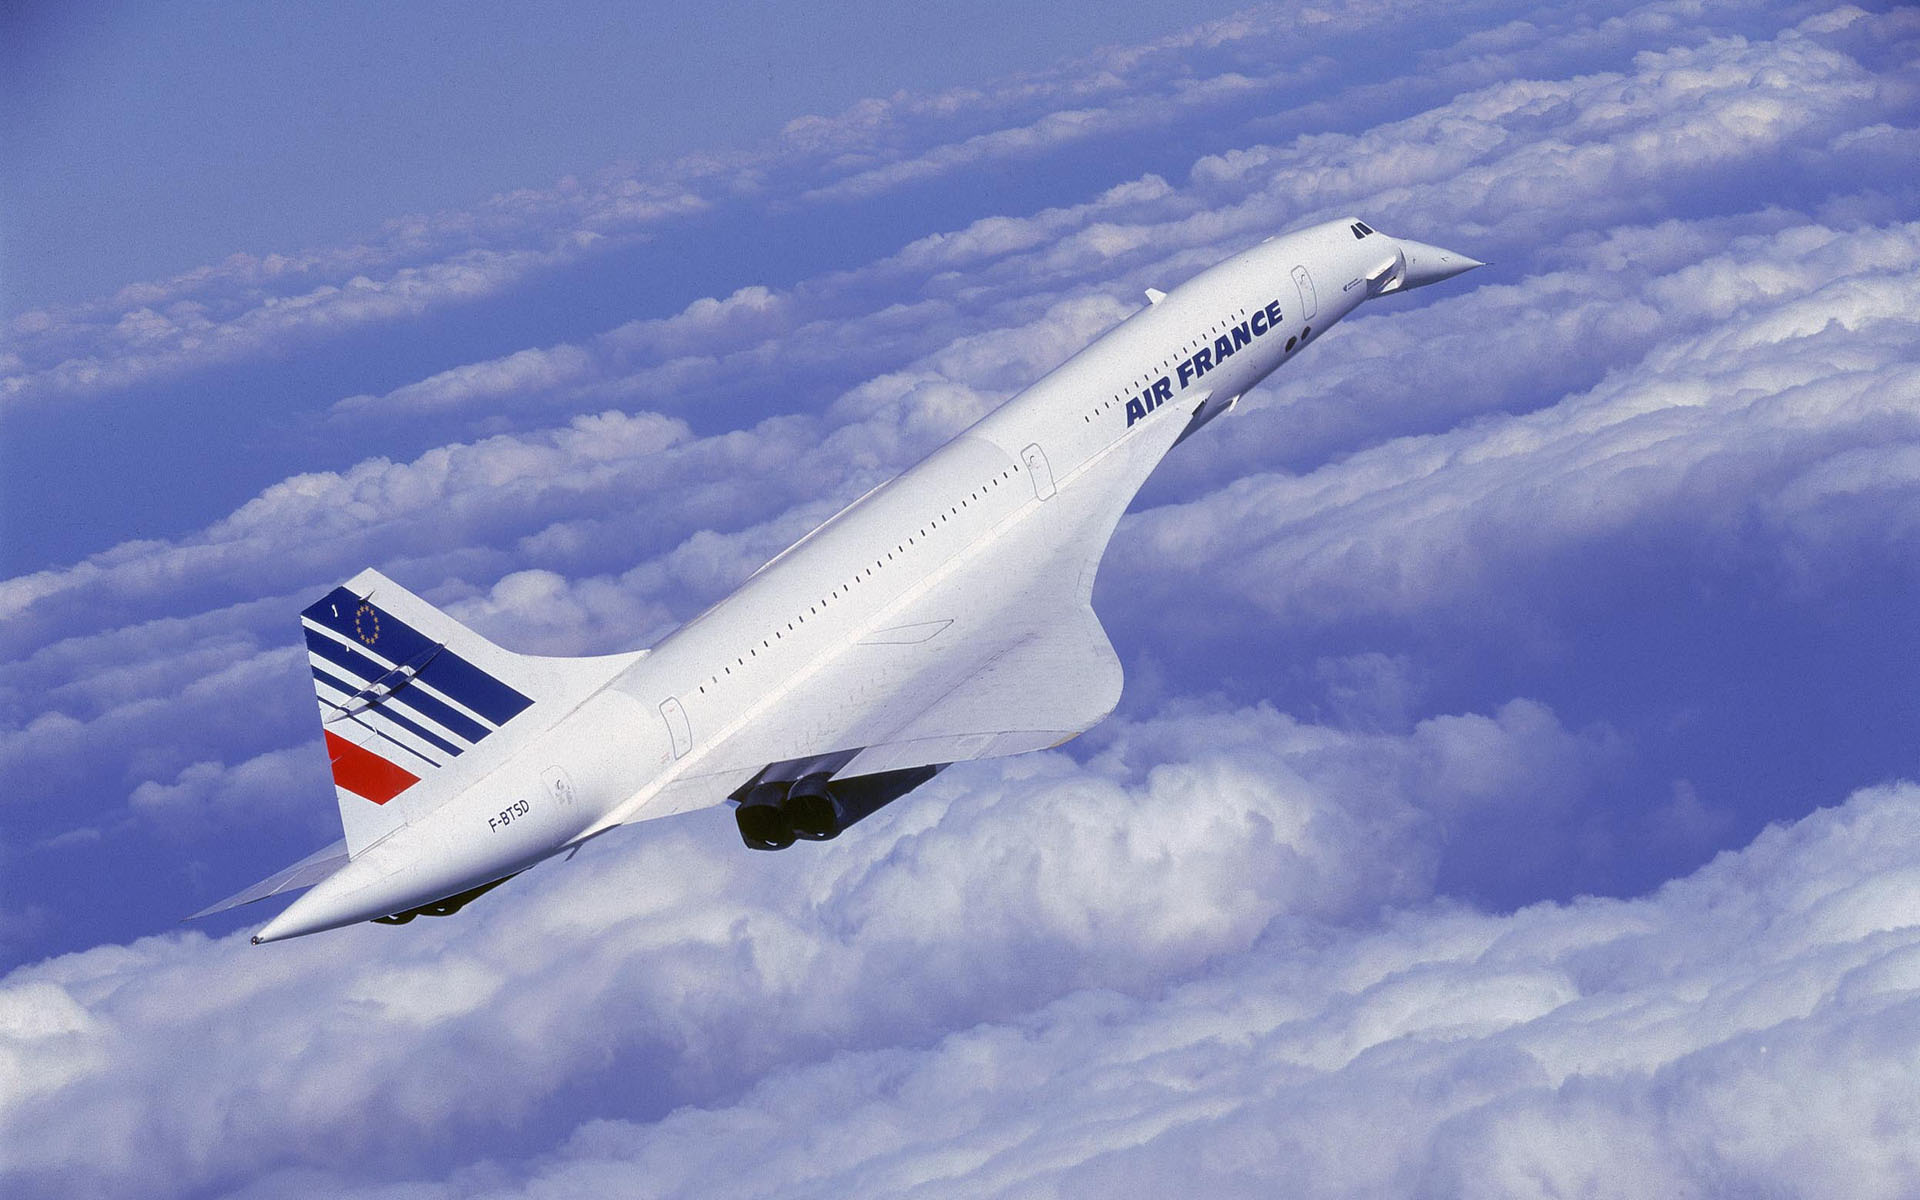 Concorde Airplane Wallpapers - Top Free Concorde Airplane Backgrounds 1920x1200